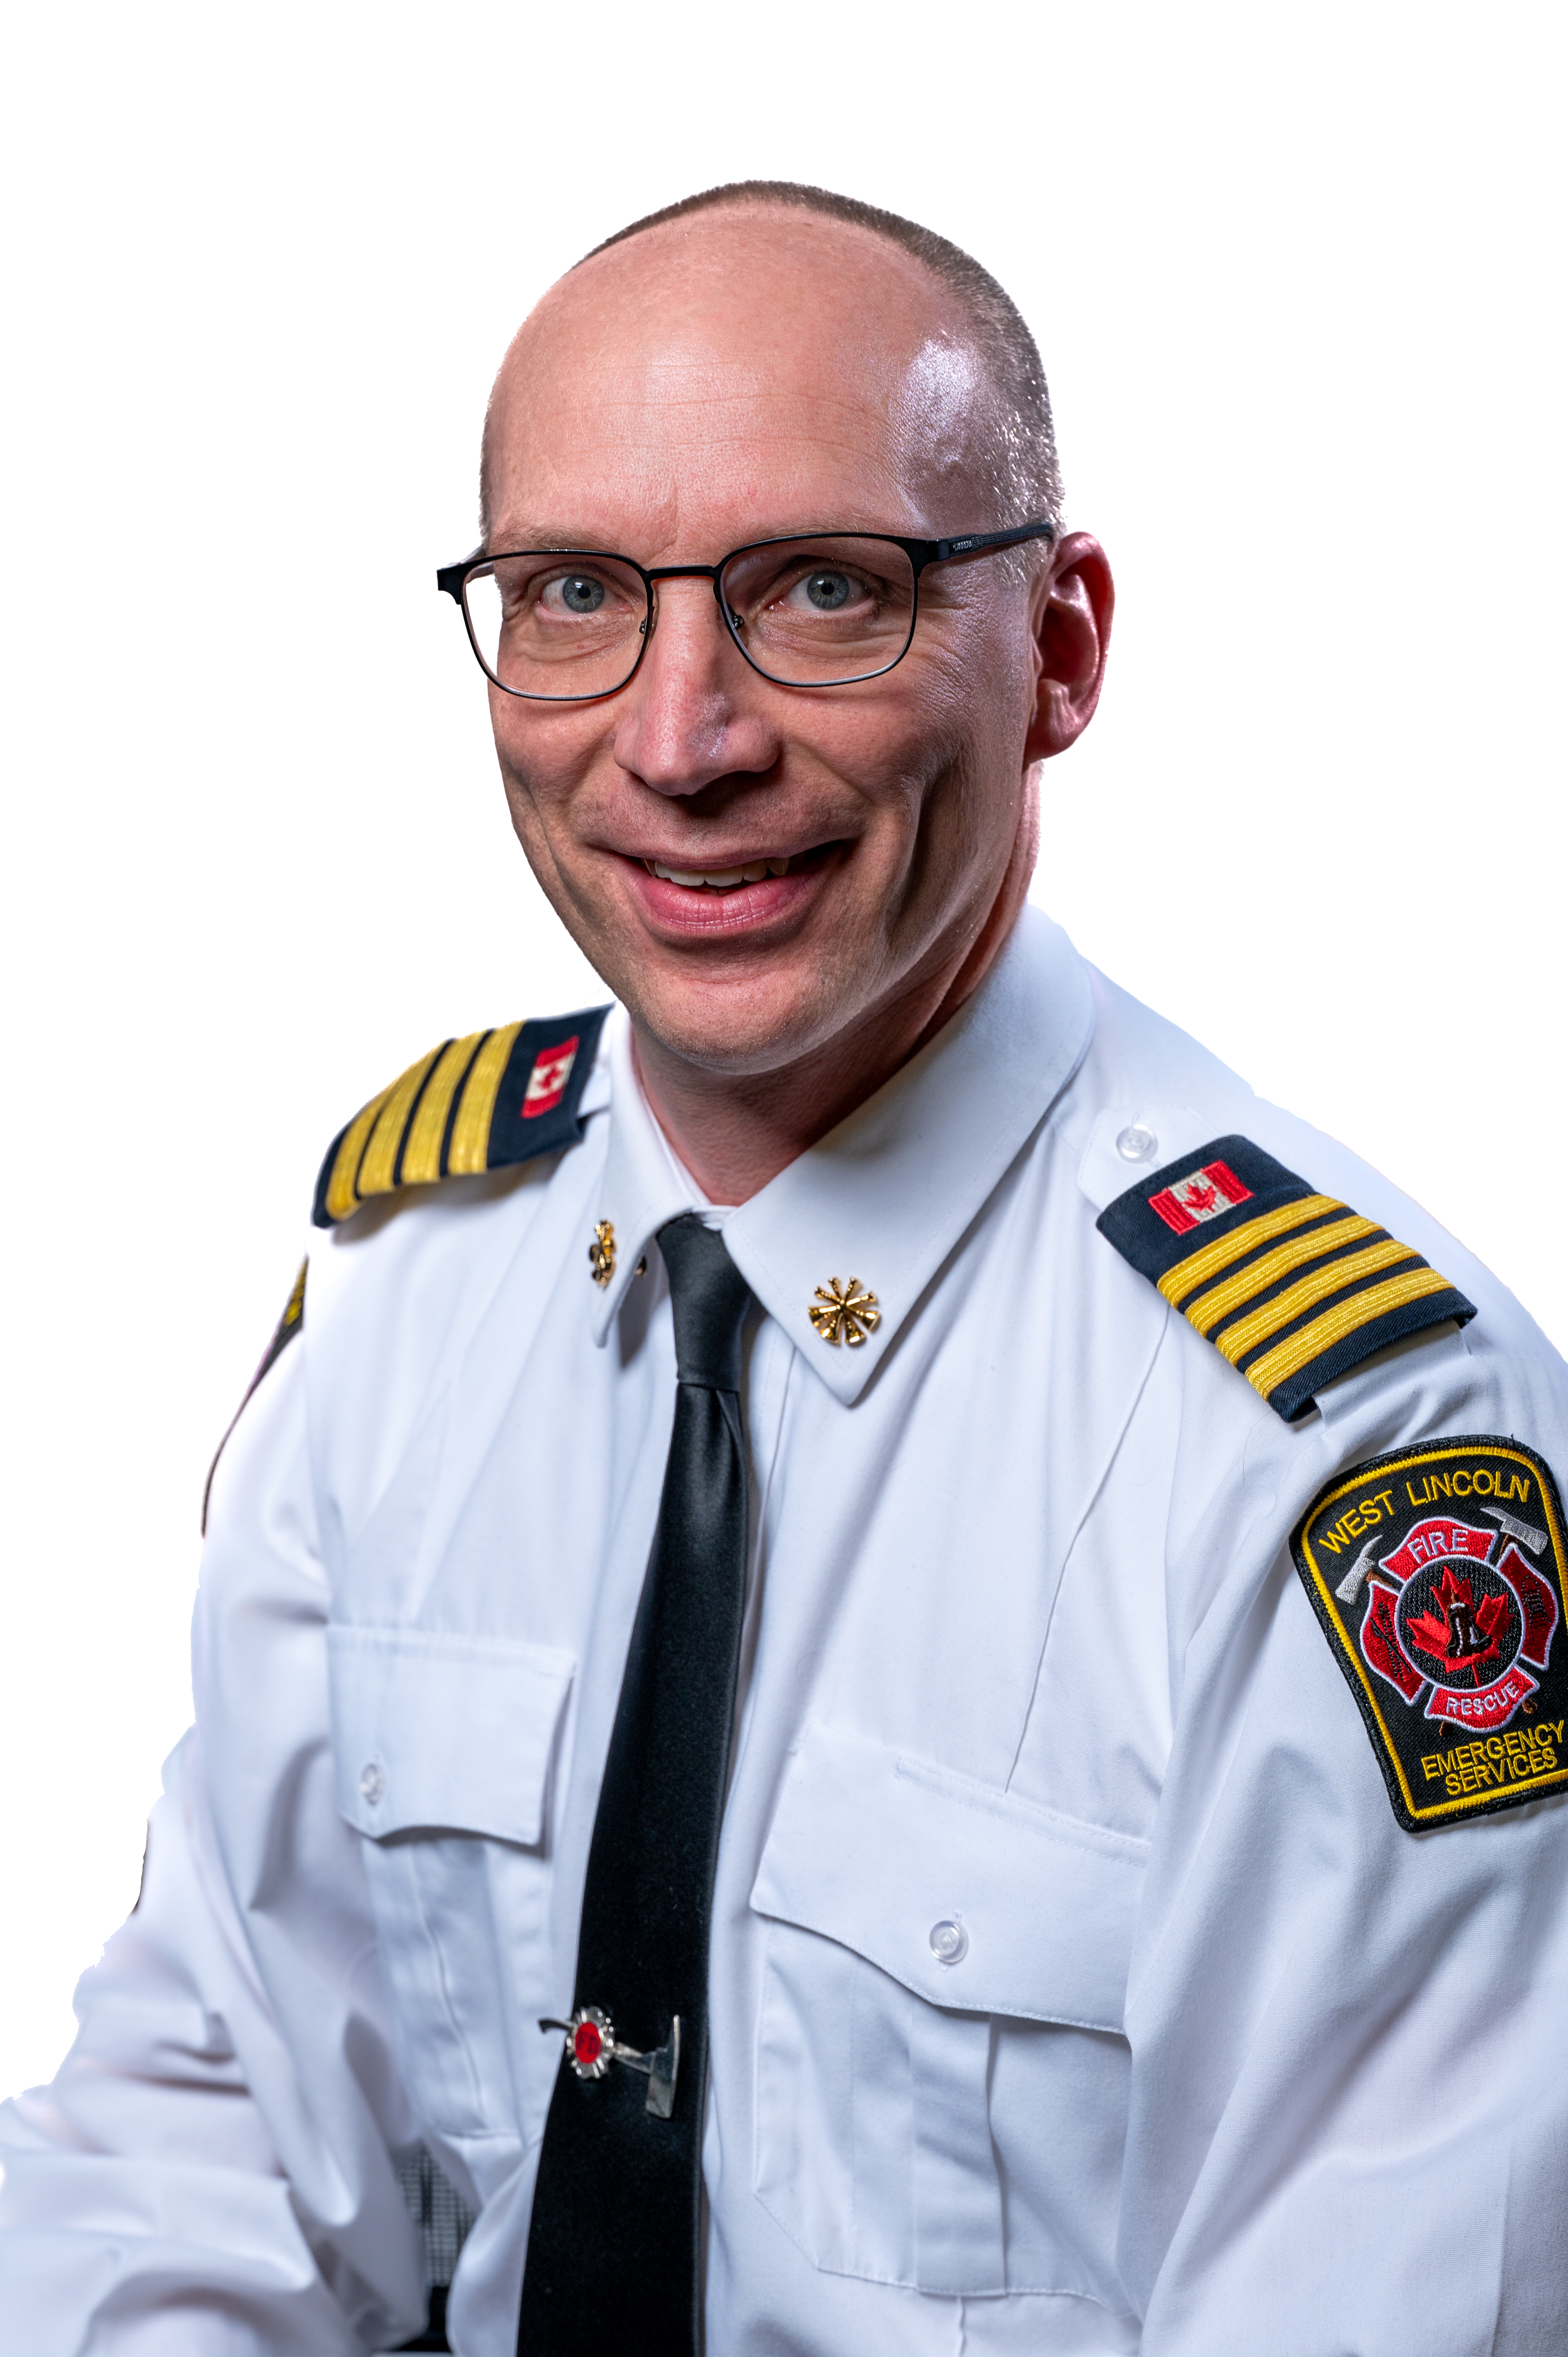 Tim Hofsink, Acting Fire Chief